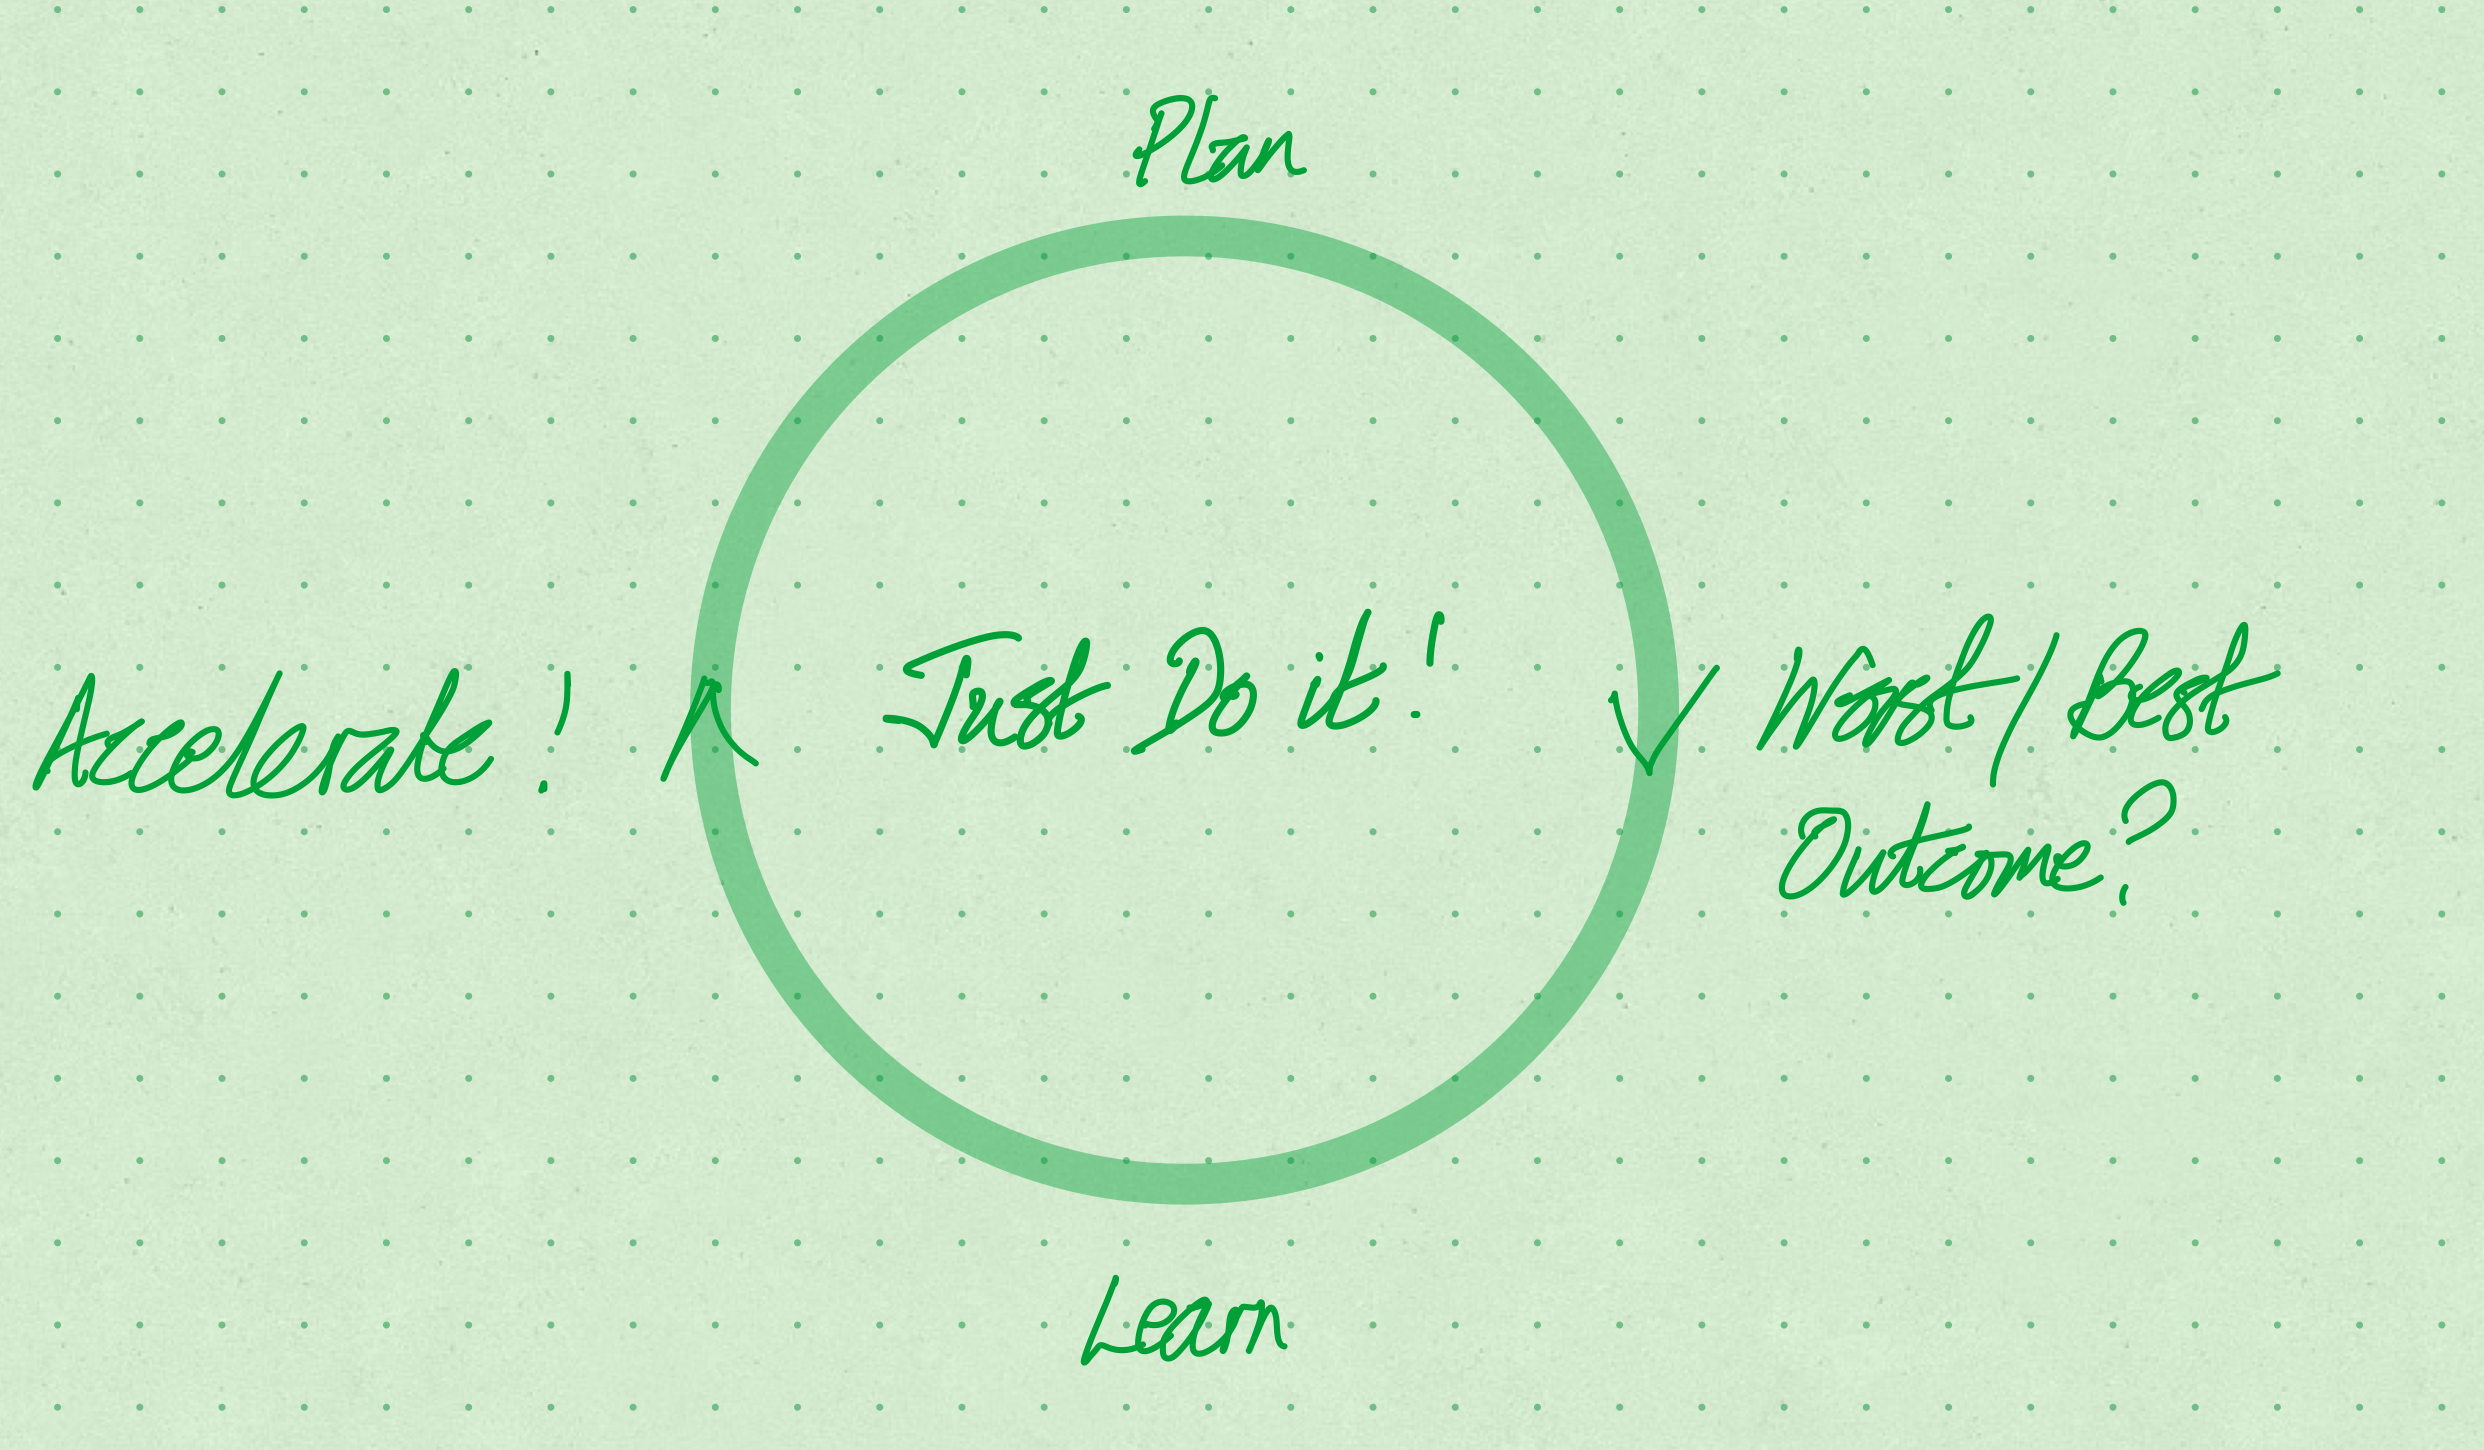 Founders and product leaders: Just do it… and plan to learn from it and accelerate your Startup!